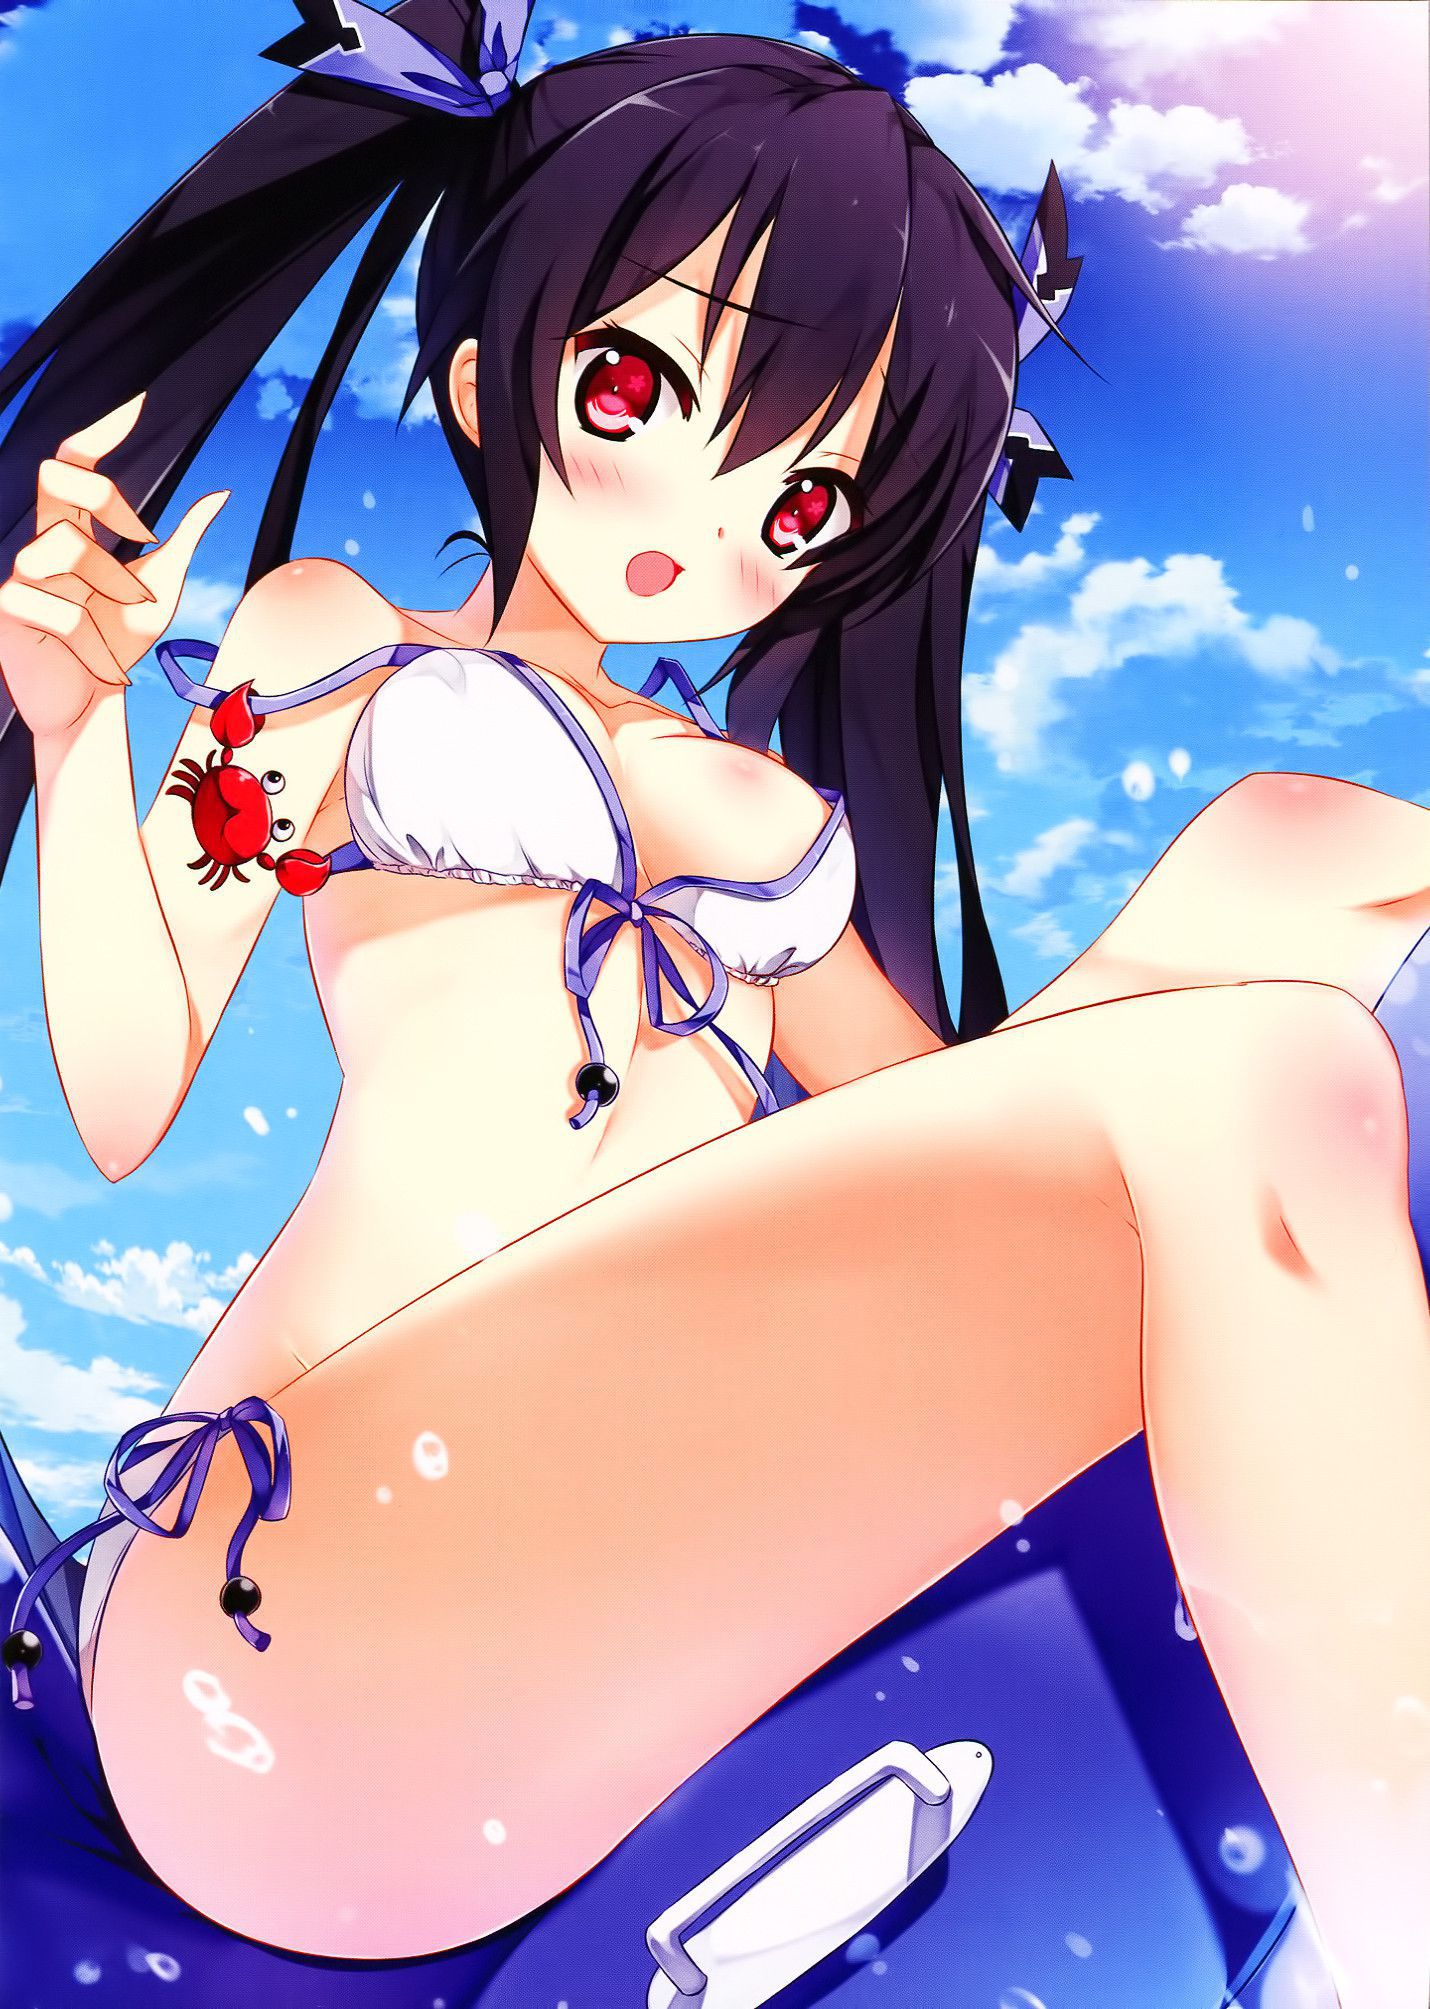 A secondary image to be squeezed in a swimsuit! 3